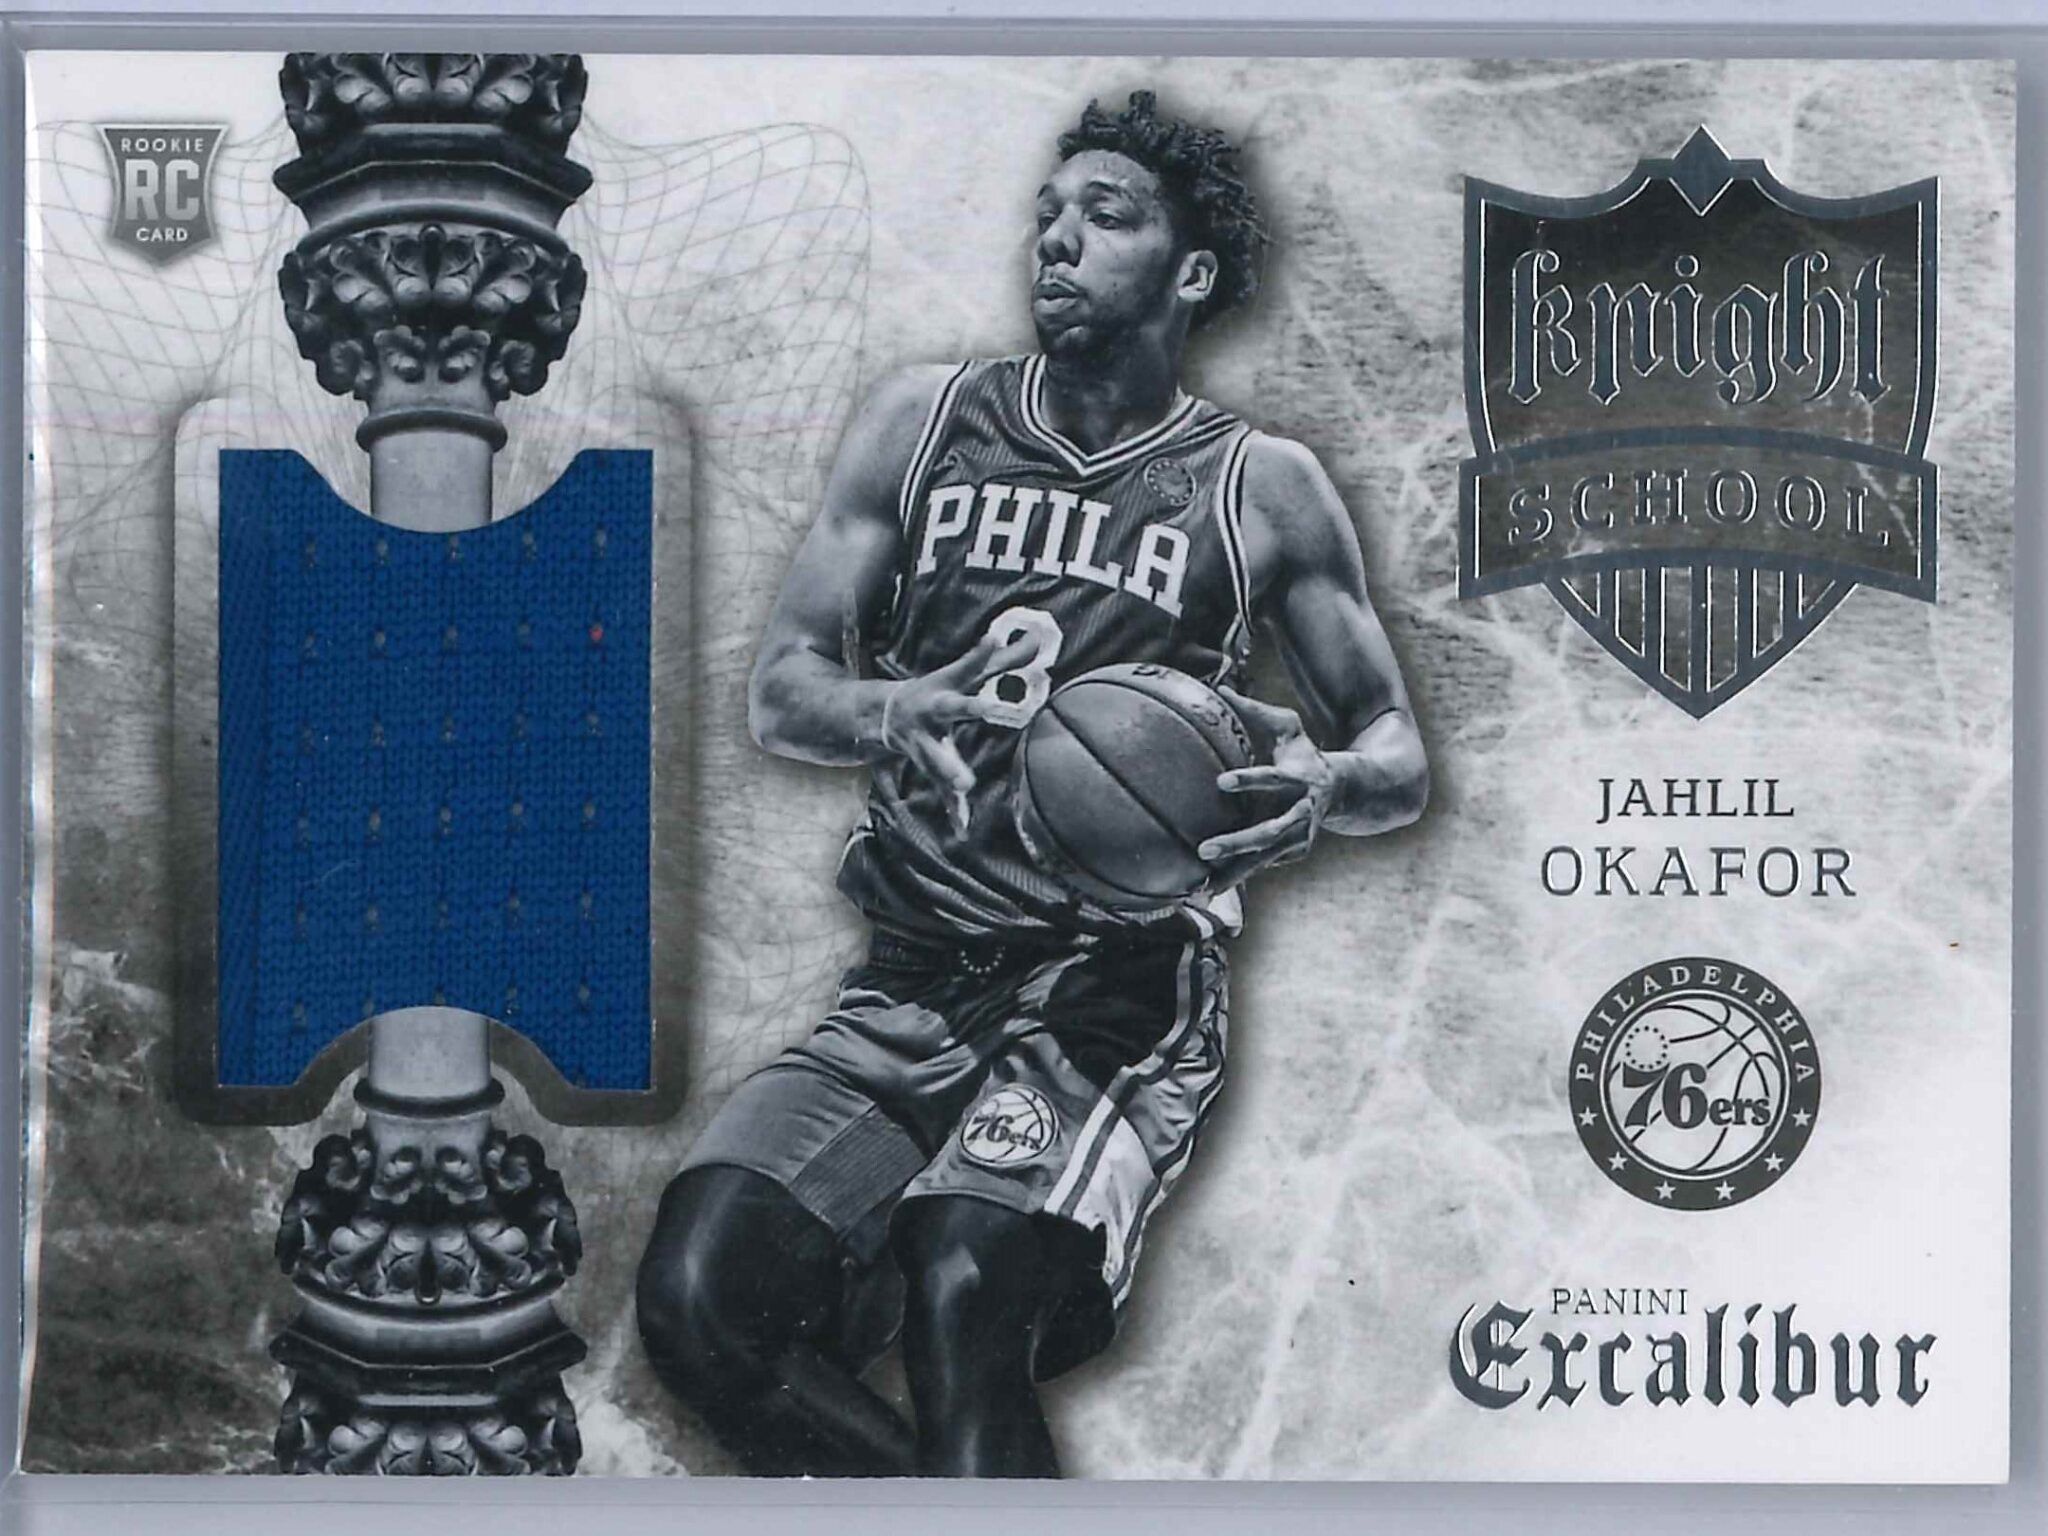 Jahlil Okafor Panini Excalibur 2015 16 Knight School RC Patch Rookie Patch 1 scaled